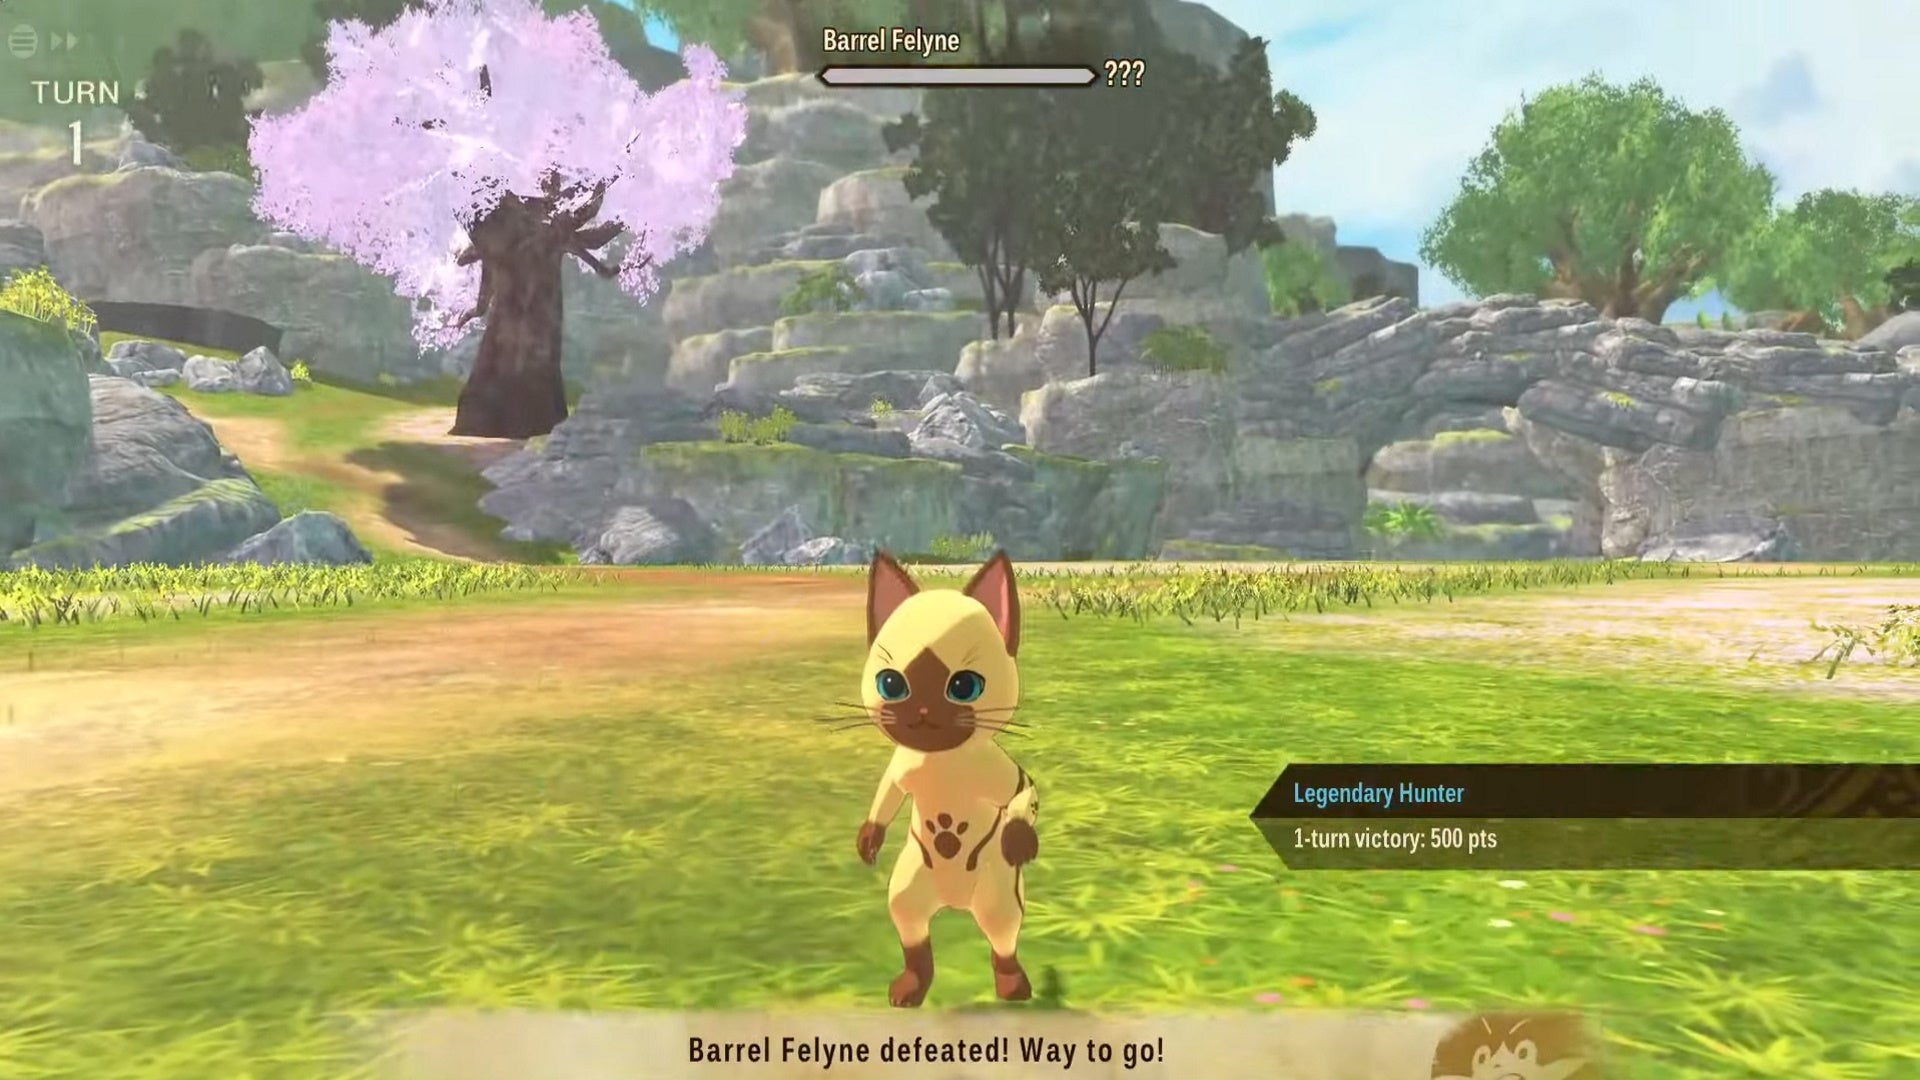 Monster Hunter Stories 2 Barrel Felyne locations and how to defeat